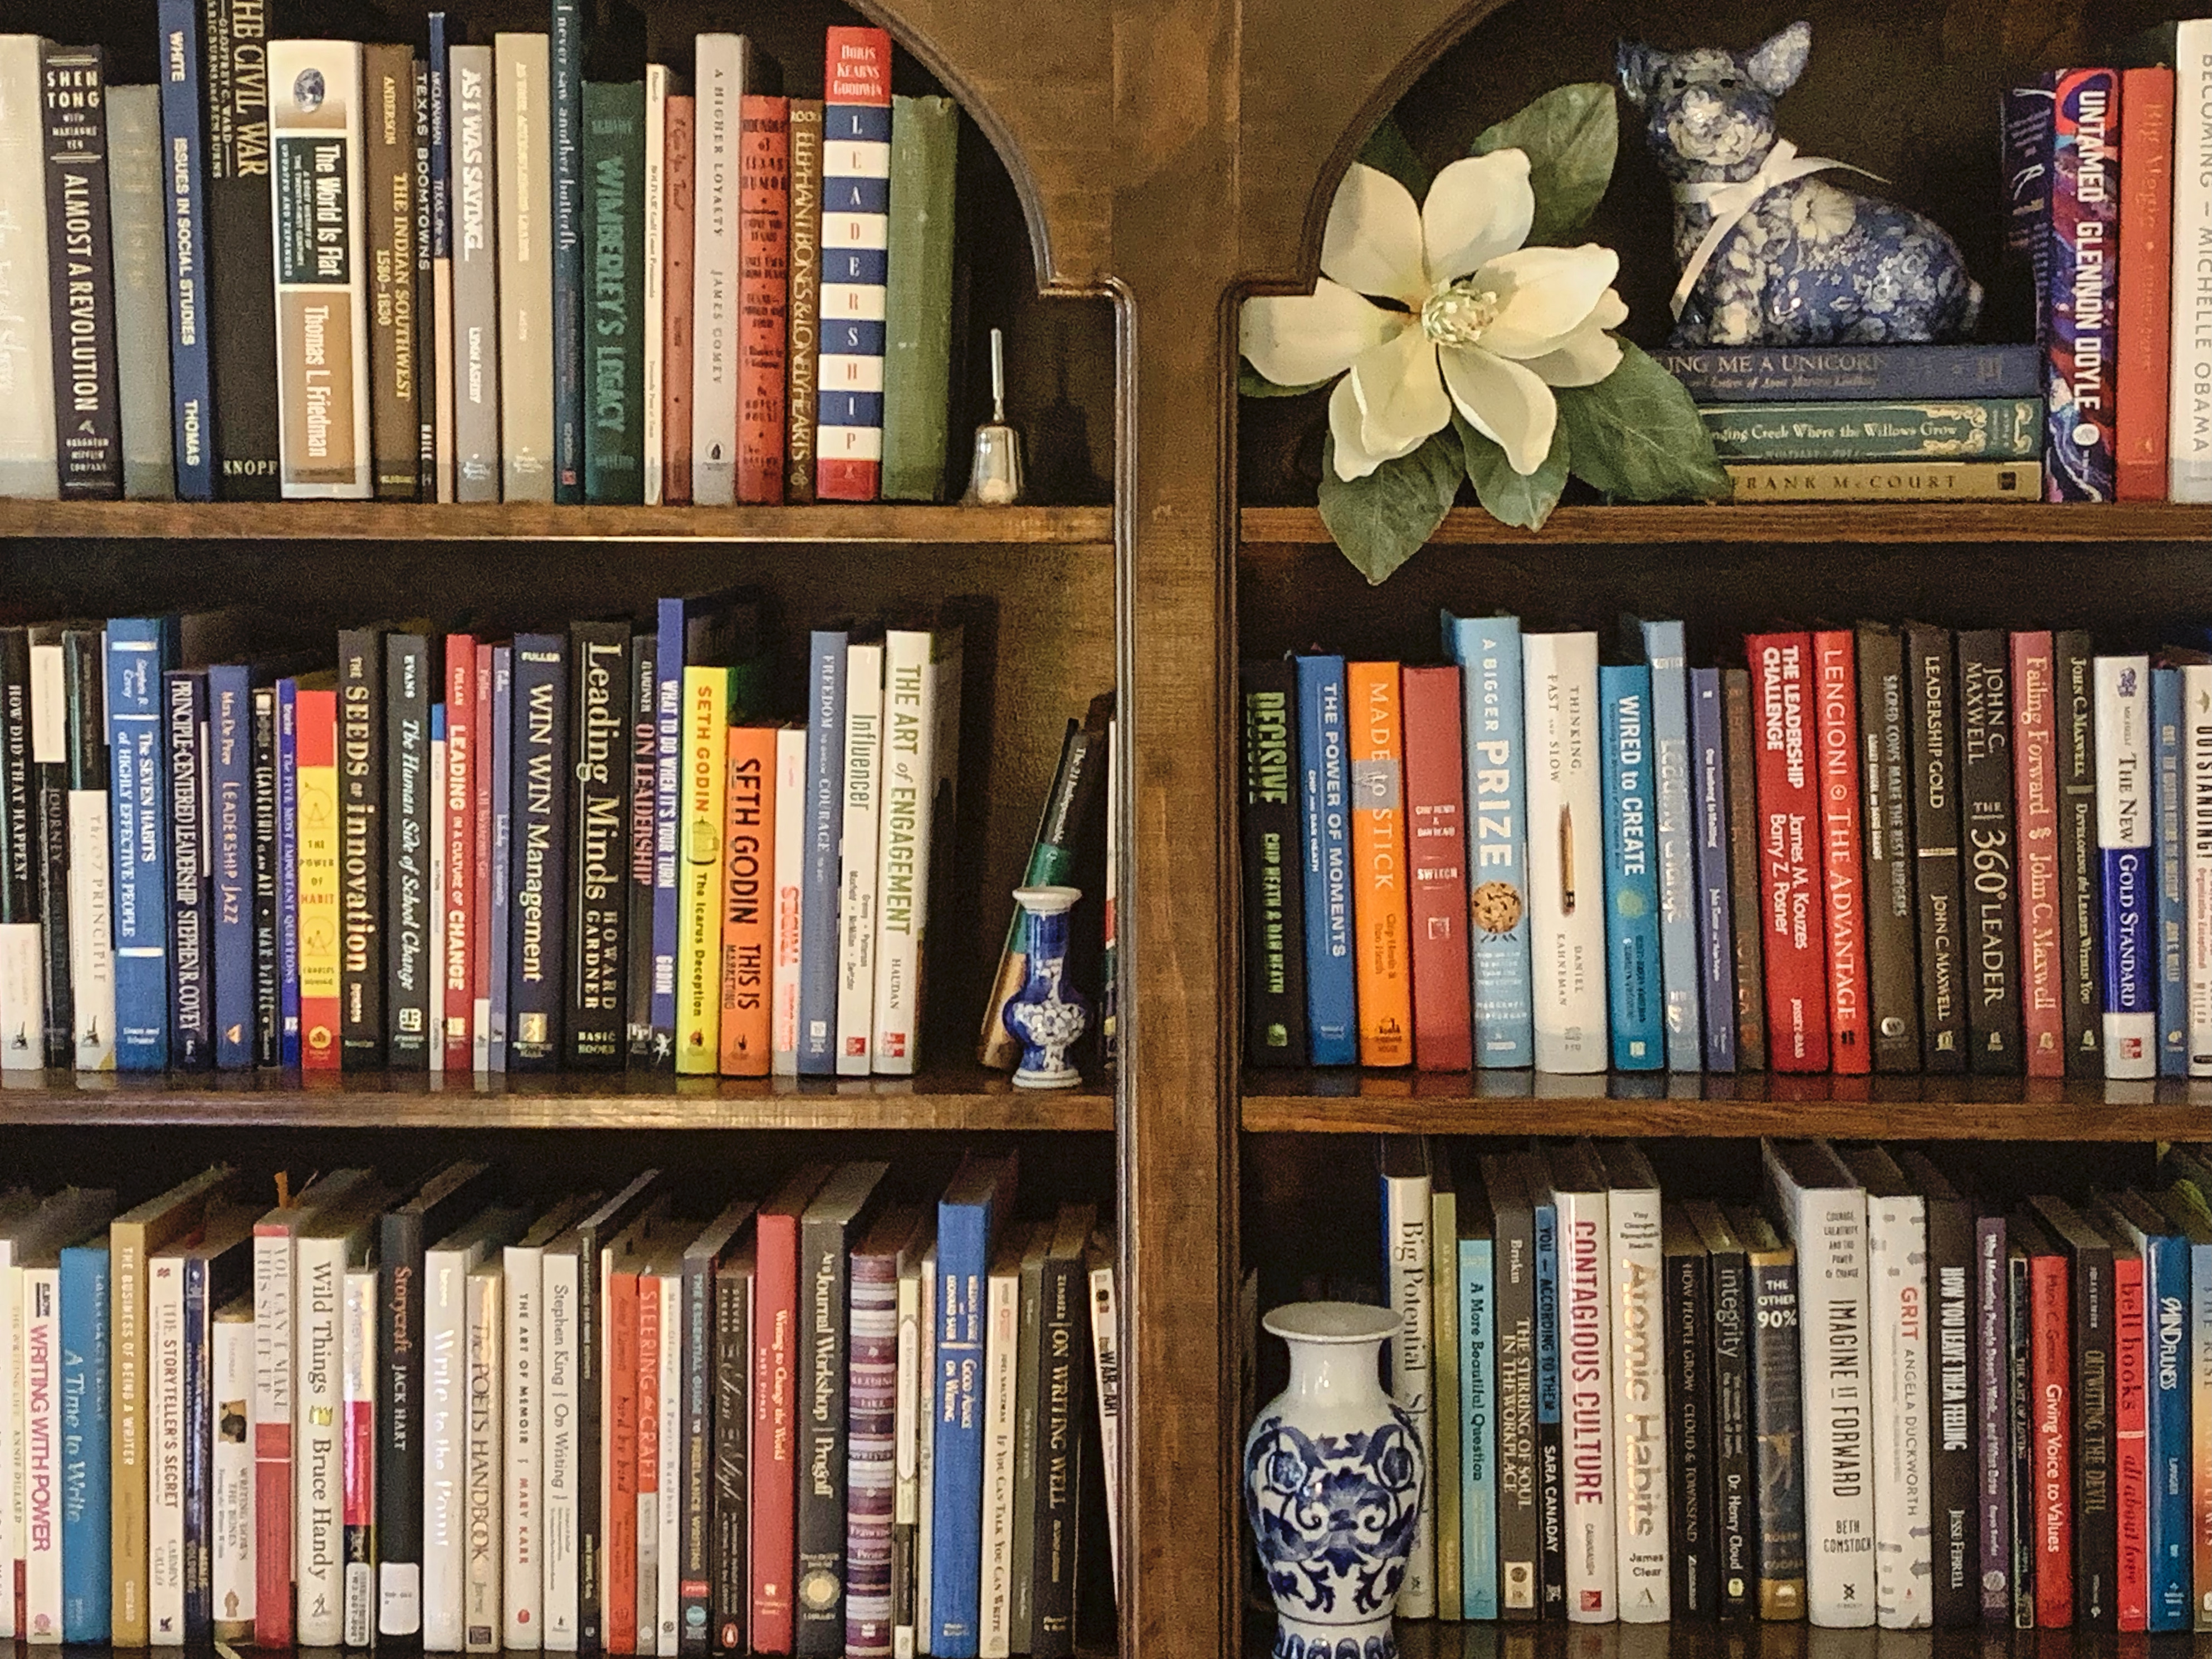 A bookshelf with books, vases, and a silk magnolia blossom-the start of a book list